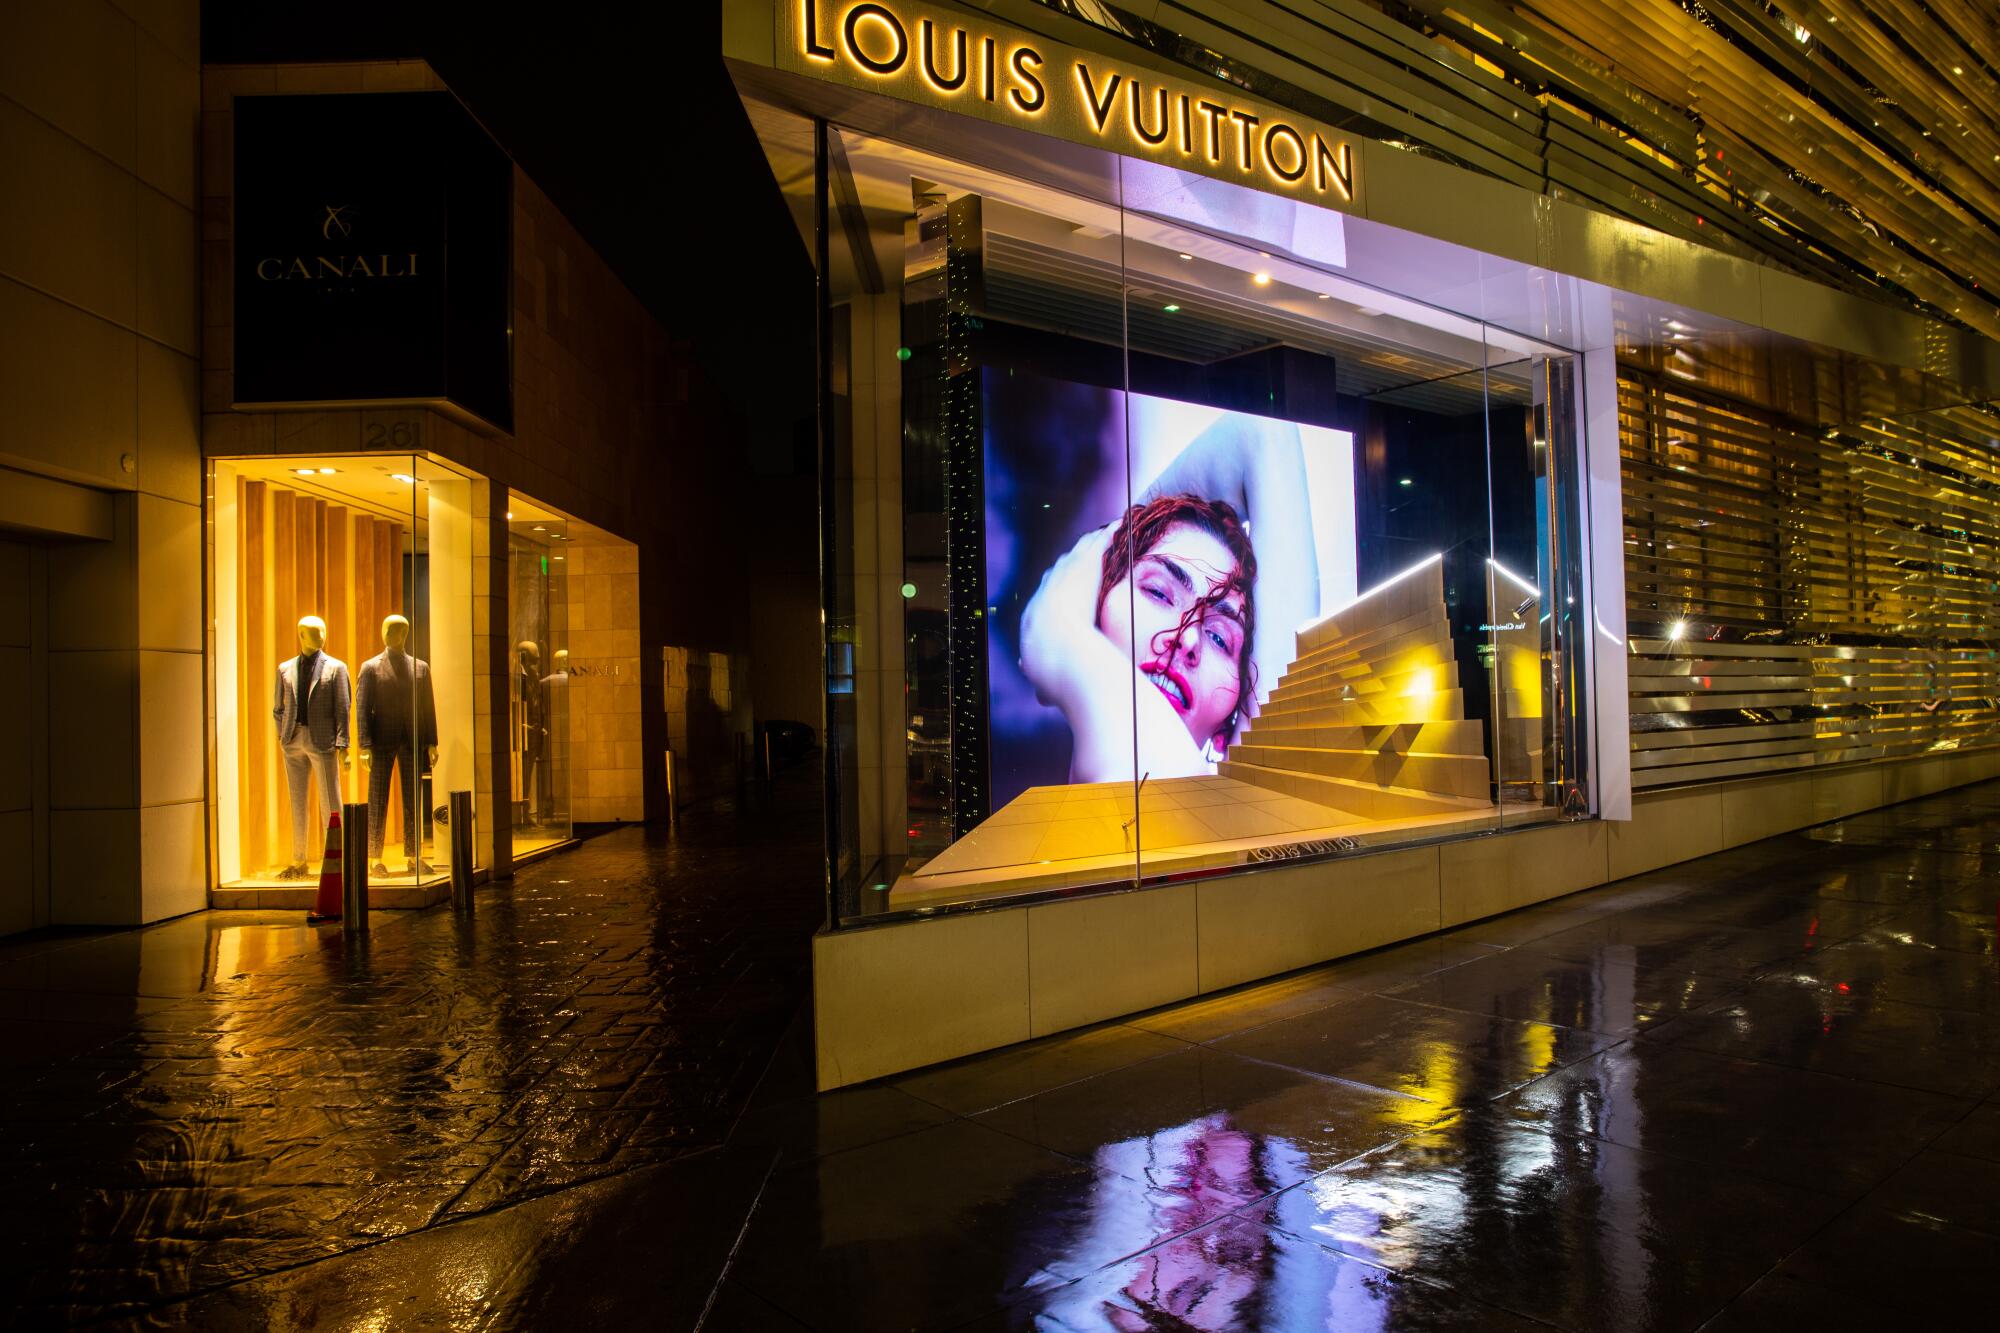 The two level Louis Vuitton store is quiet and empty